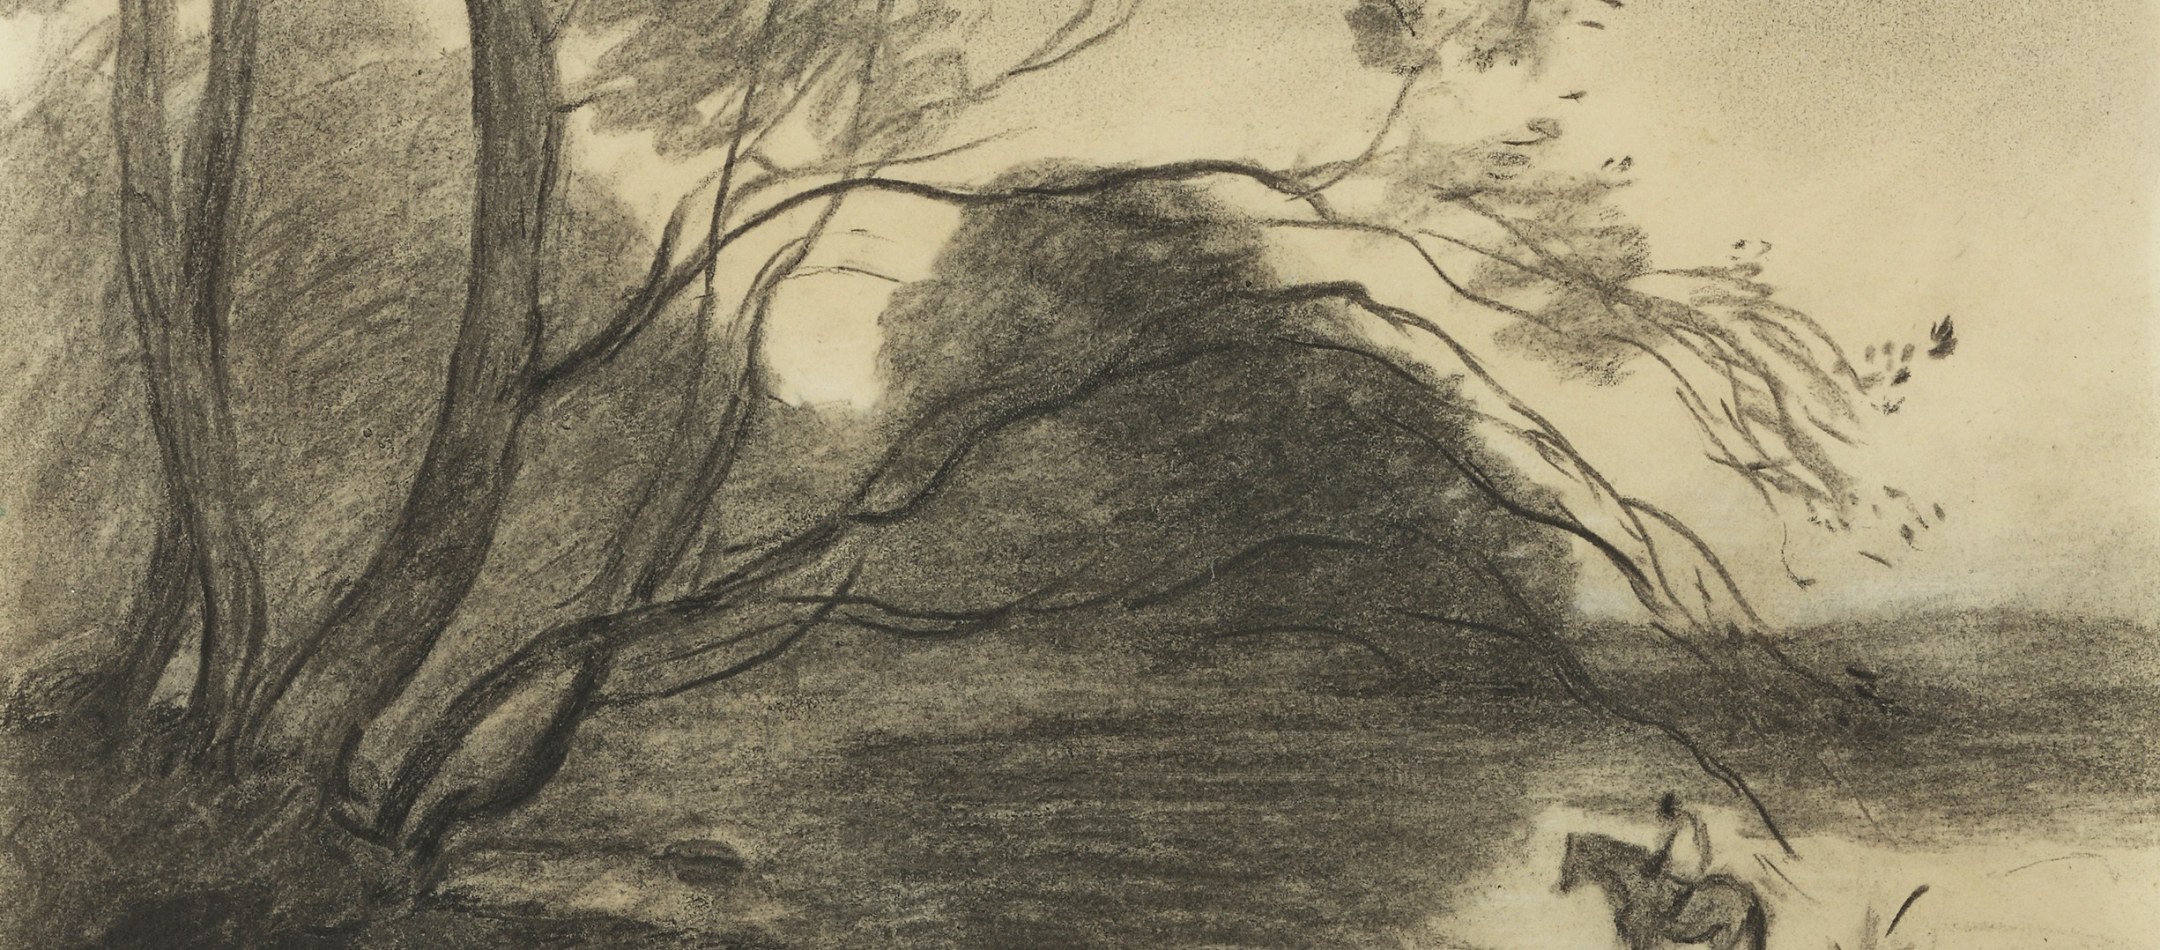 Jean-Baptiste-Camille Corot, The Ford under the Large Tree, c. 1864  Charcoal on paper; 7 1/8 x 11 3/8 inches Private Collection